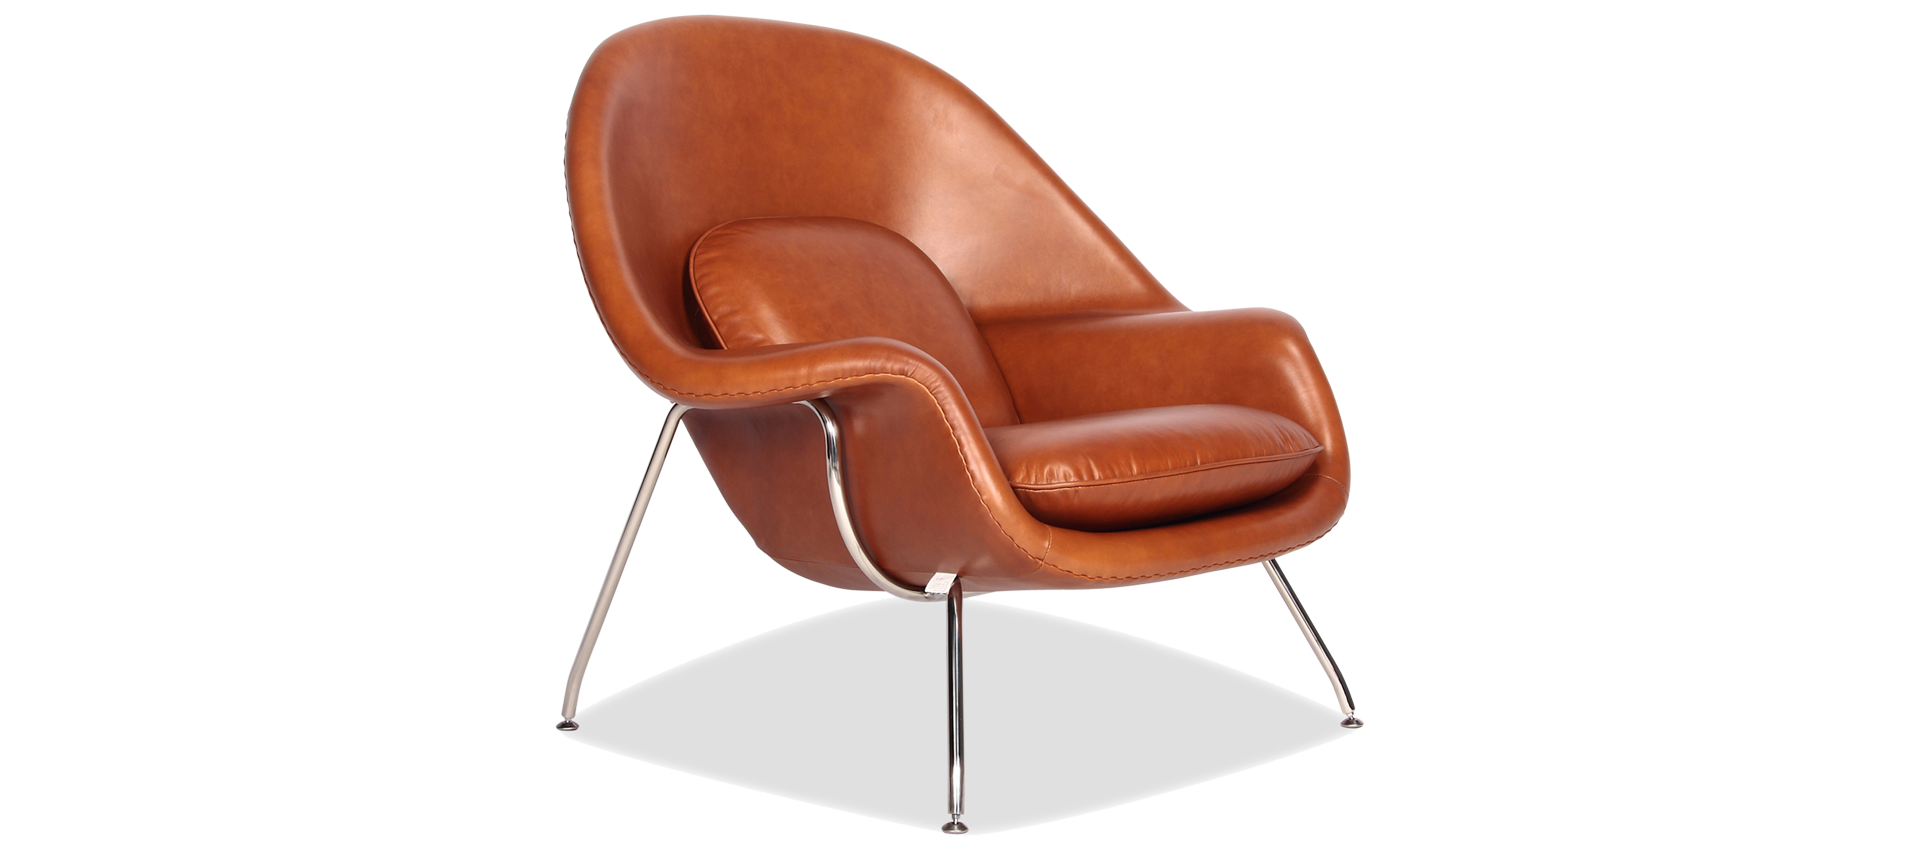 Womb Chair Premium Leather Dark Tan, Leather Womb Chair